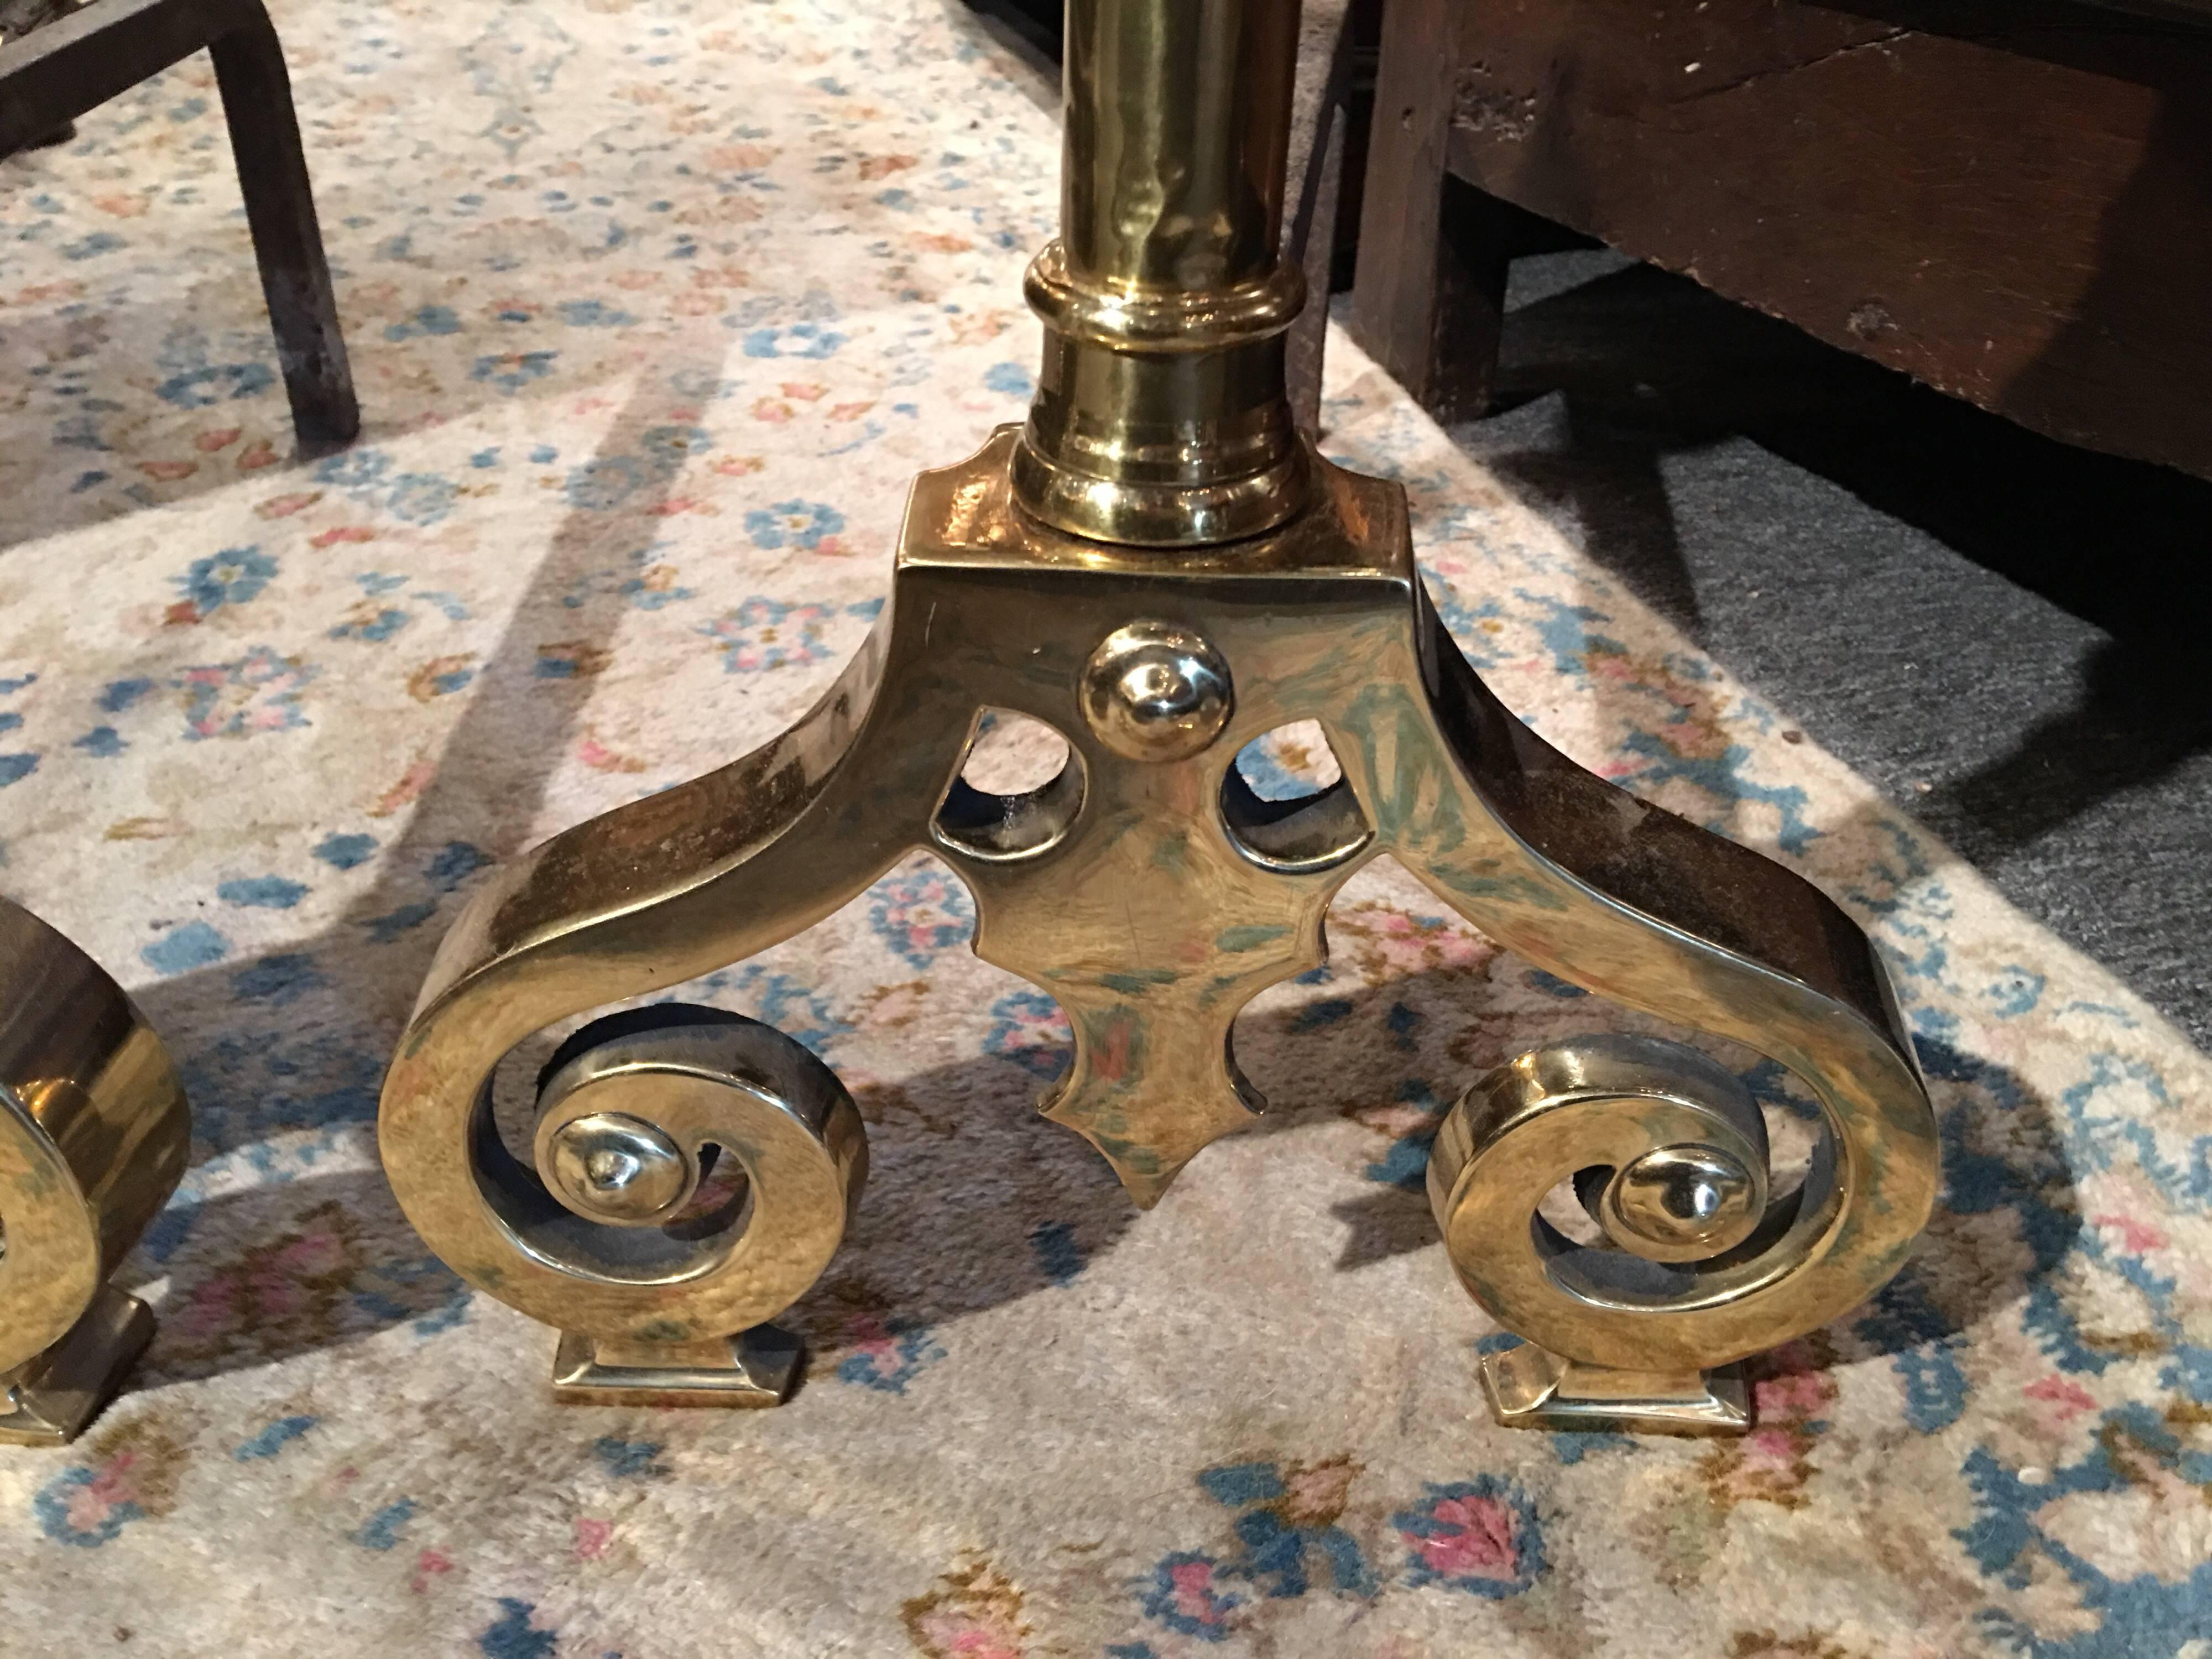 Pair of polished brass chenets or andirons with decorative scrolls and towering finials, 19th century.